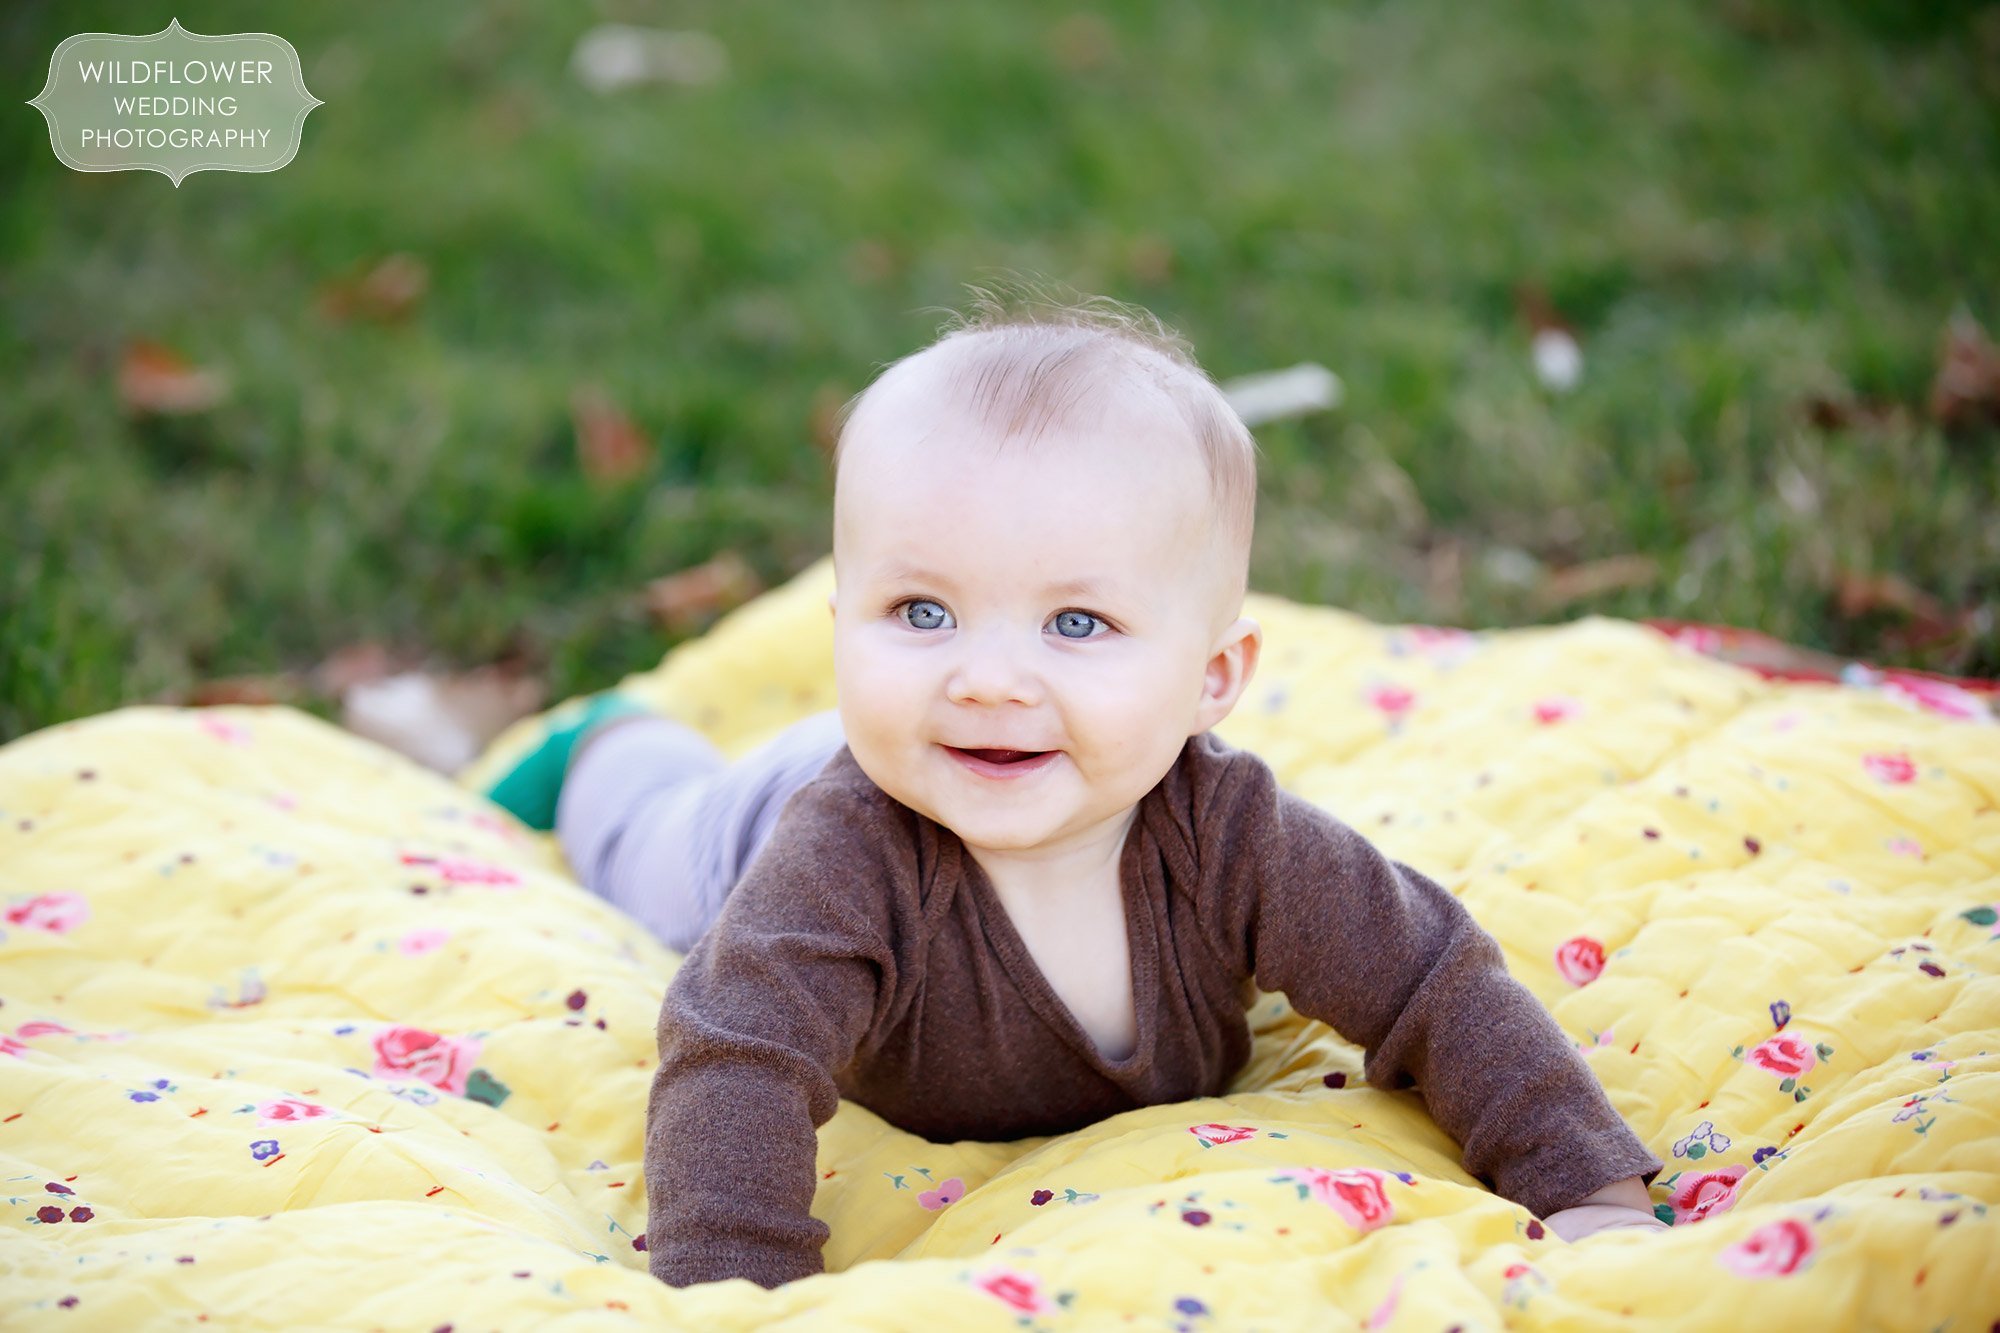 Cute baby picture of tummy time on a yellow blanket at Loose Park in MO.